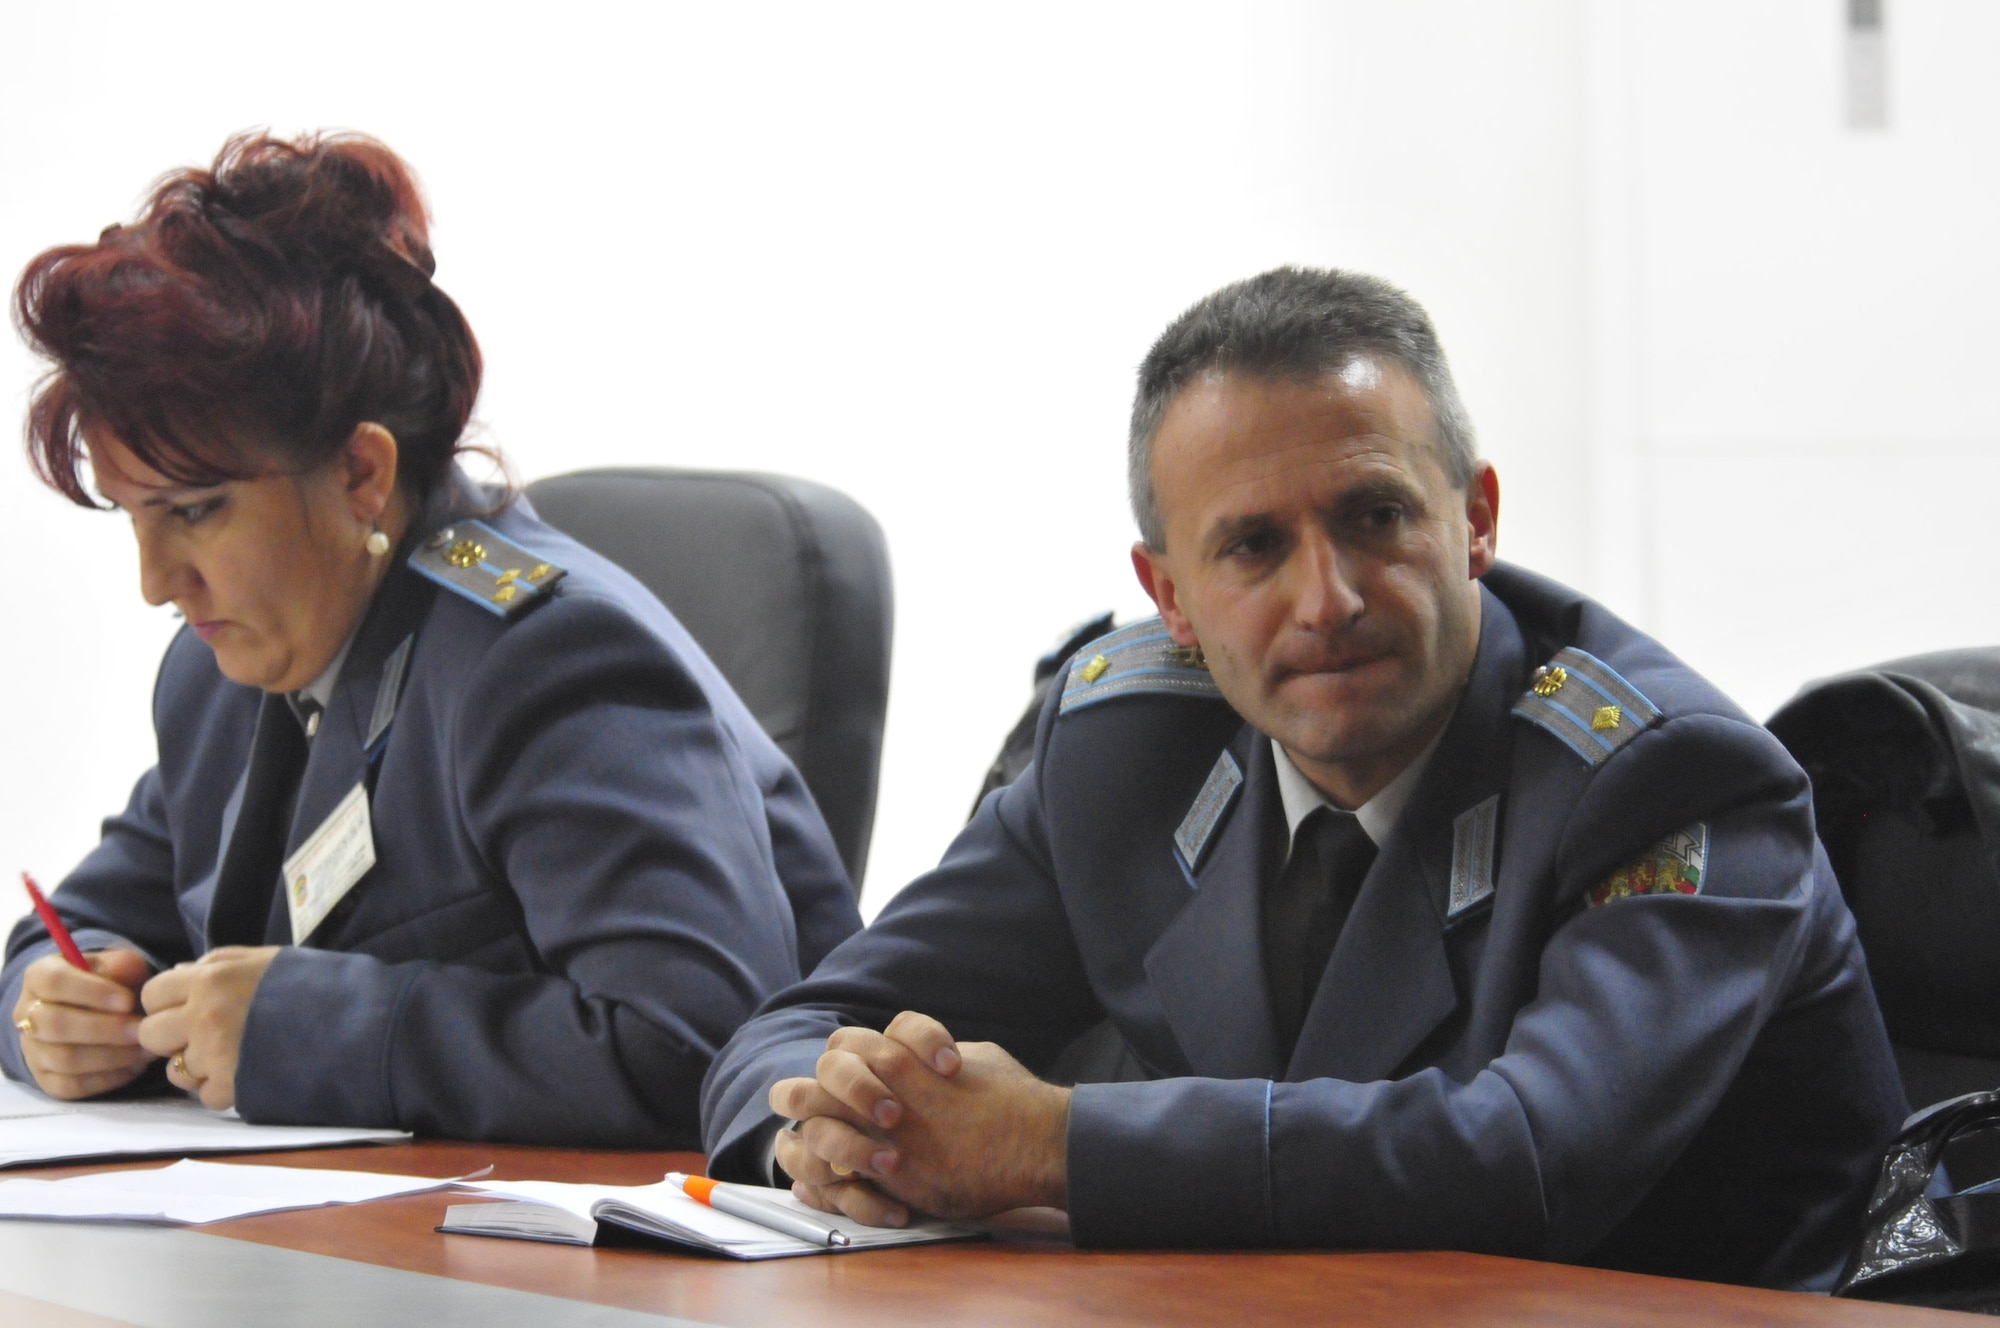 Bulgarian Air Force Officers attend a round-table discussion on the history and future of flight medicine, Oct. 19 at Graf Ignatievo Air Base, Bulgaria. Airmen from the 86th Airlift Wing and 435th Air Ground Operations Wing at Ramstein Air Base, Germany joined airmen from throughout U.S. Air Forces in Europe in Plovdiv, Bulgaria, for Thracian Fall 2010, a week of on-site training designed to building the partnership between the U.S. and Bulgarian Air Force. (U.S. Air Force photo by Tech. Sgt. Michael Voss)